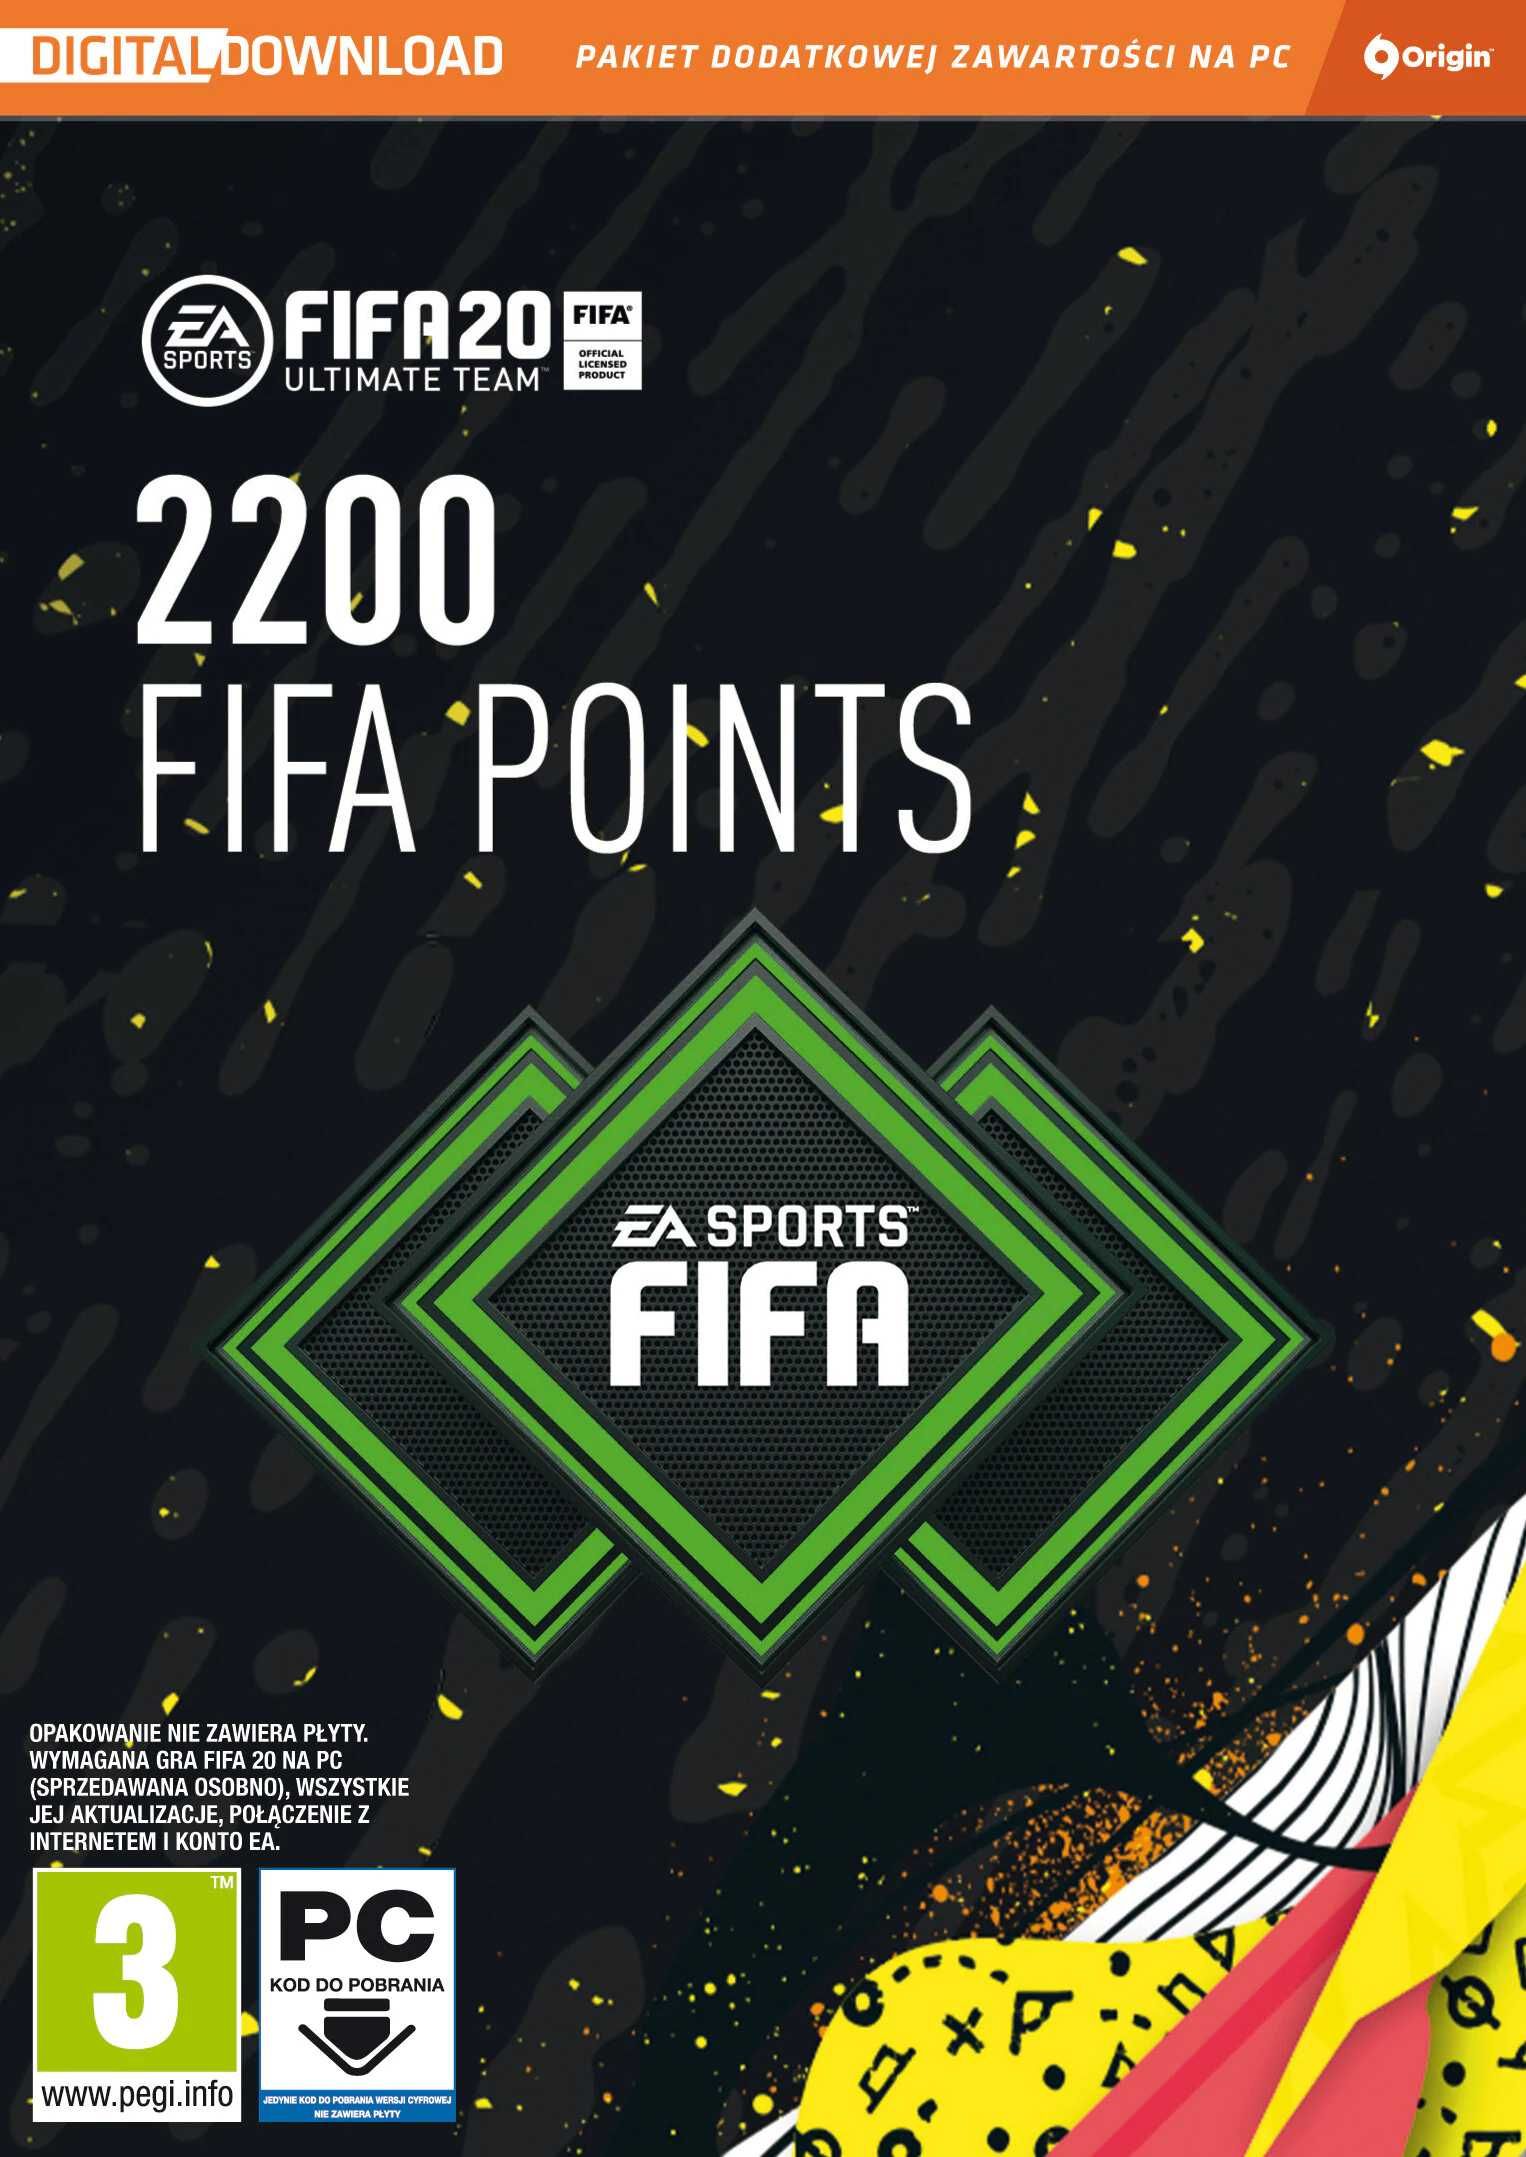 FIFA Ultimate Team 2200 FIFA Points PUNKTY FIFA 20 PC 2200 punktów